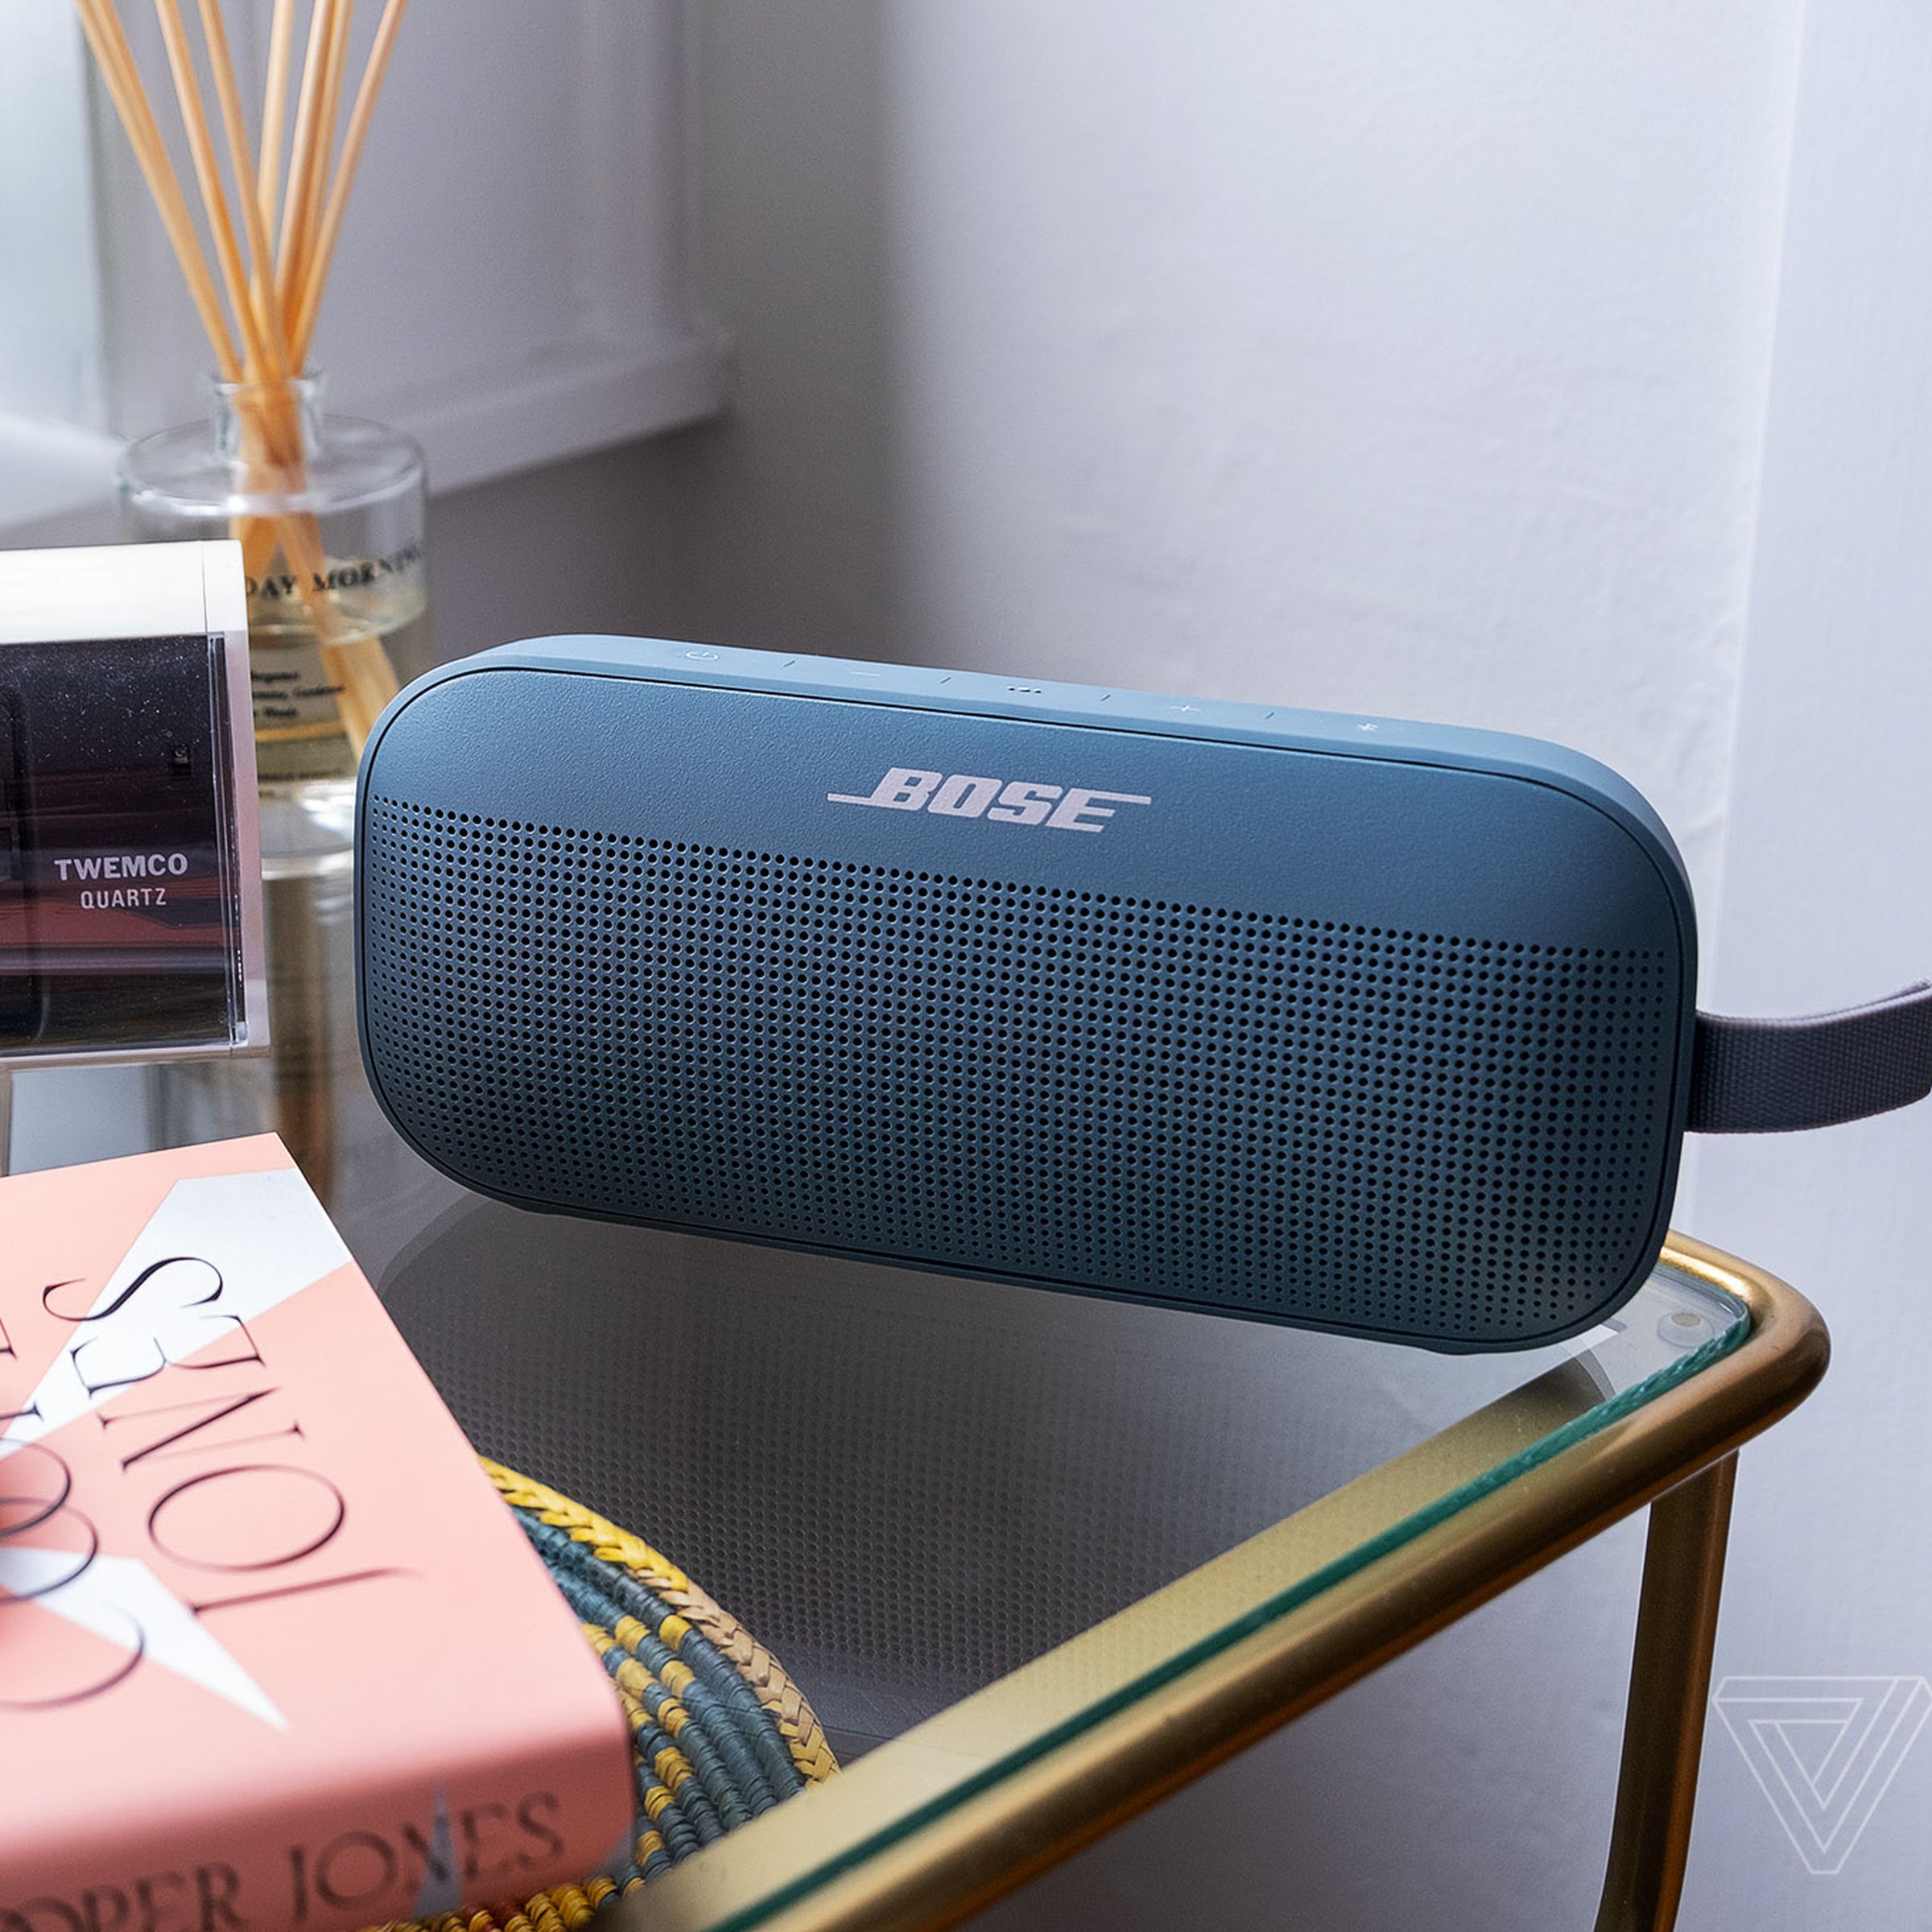 A photo of the Bose SoundLink Flex on a bedside table.